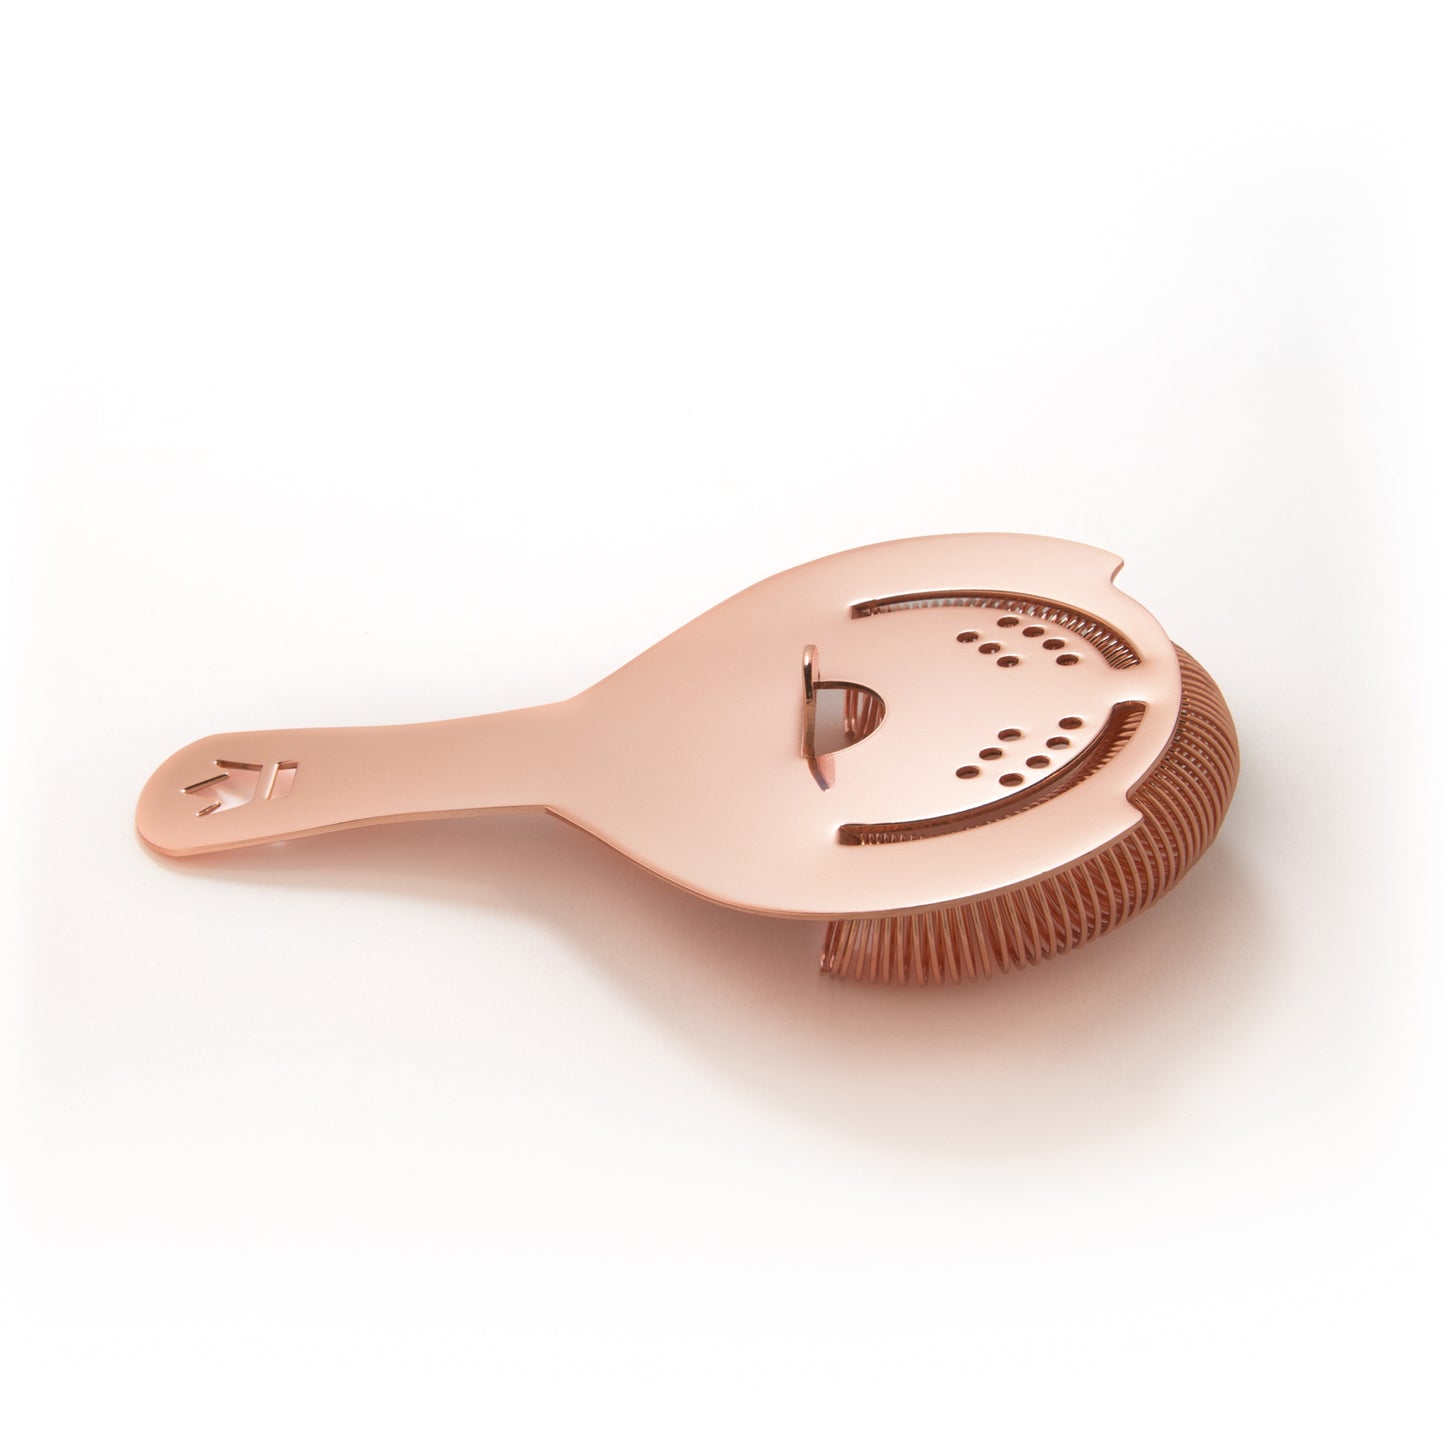 KORIKO® COCKTAIL STRAINER / COPPER-PLATED